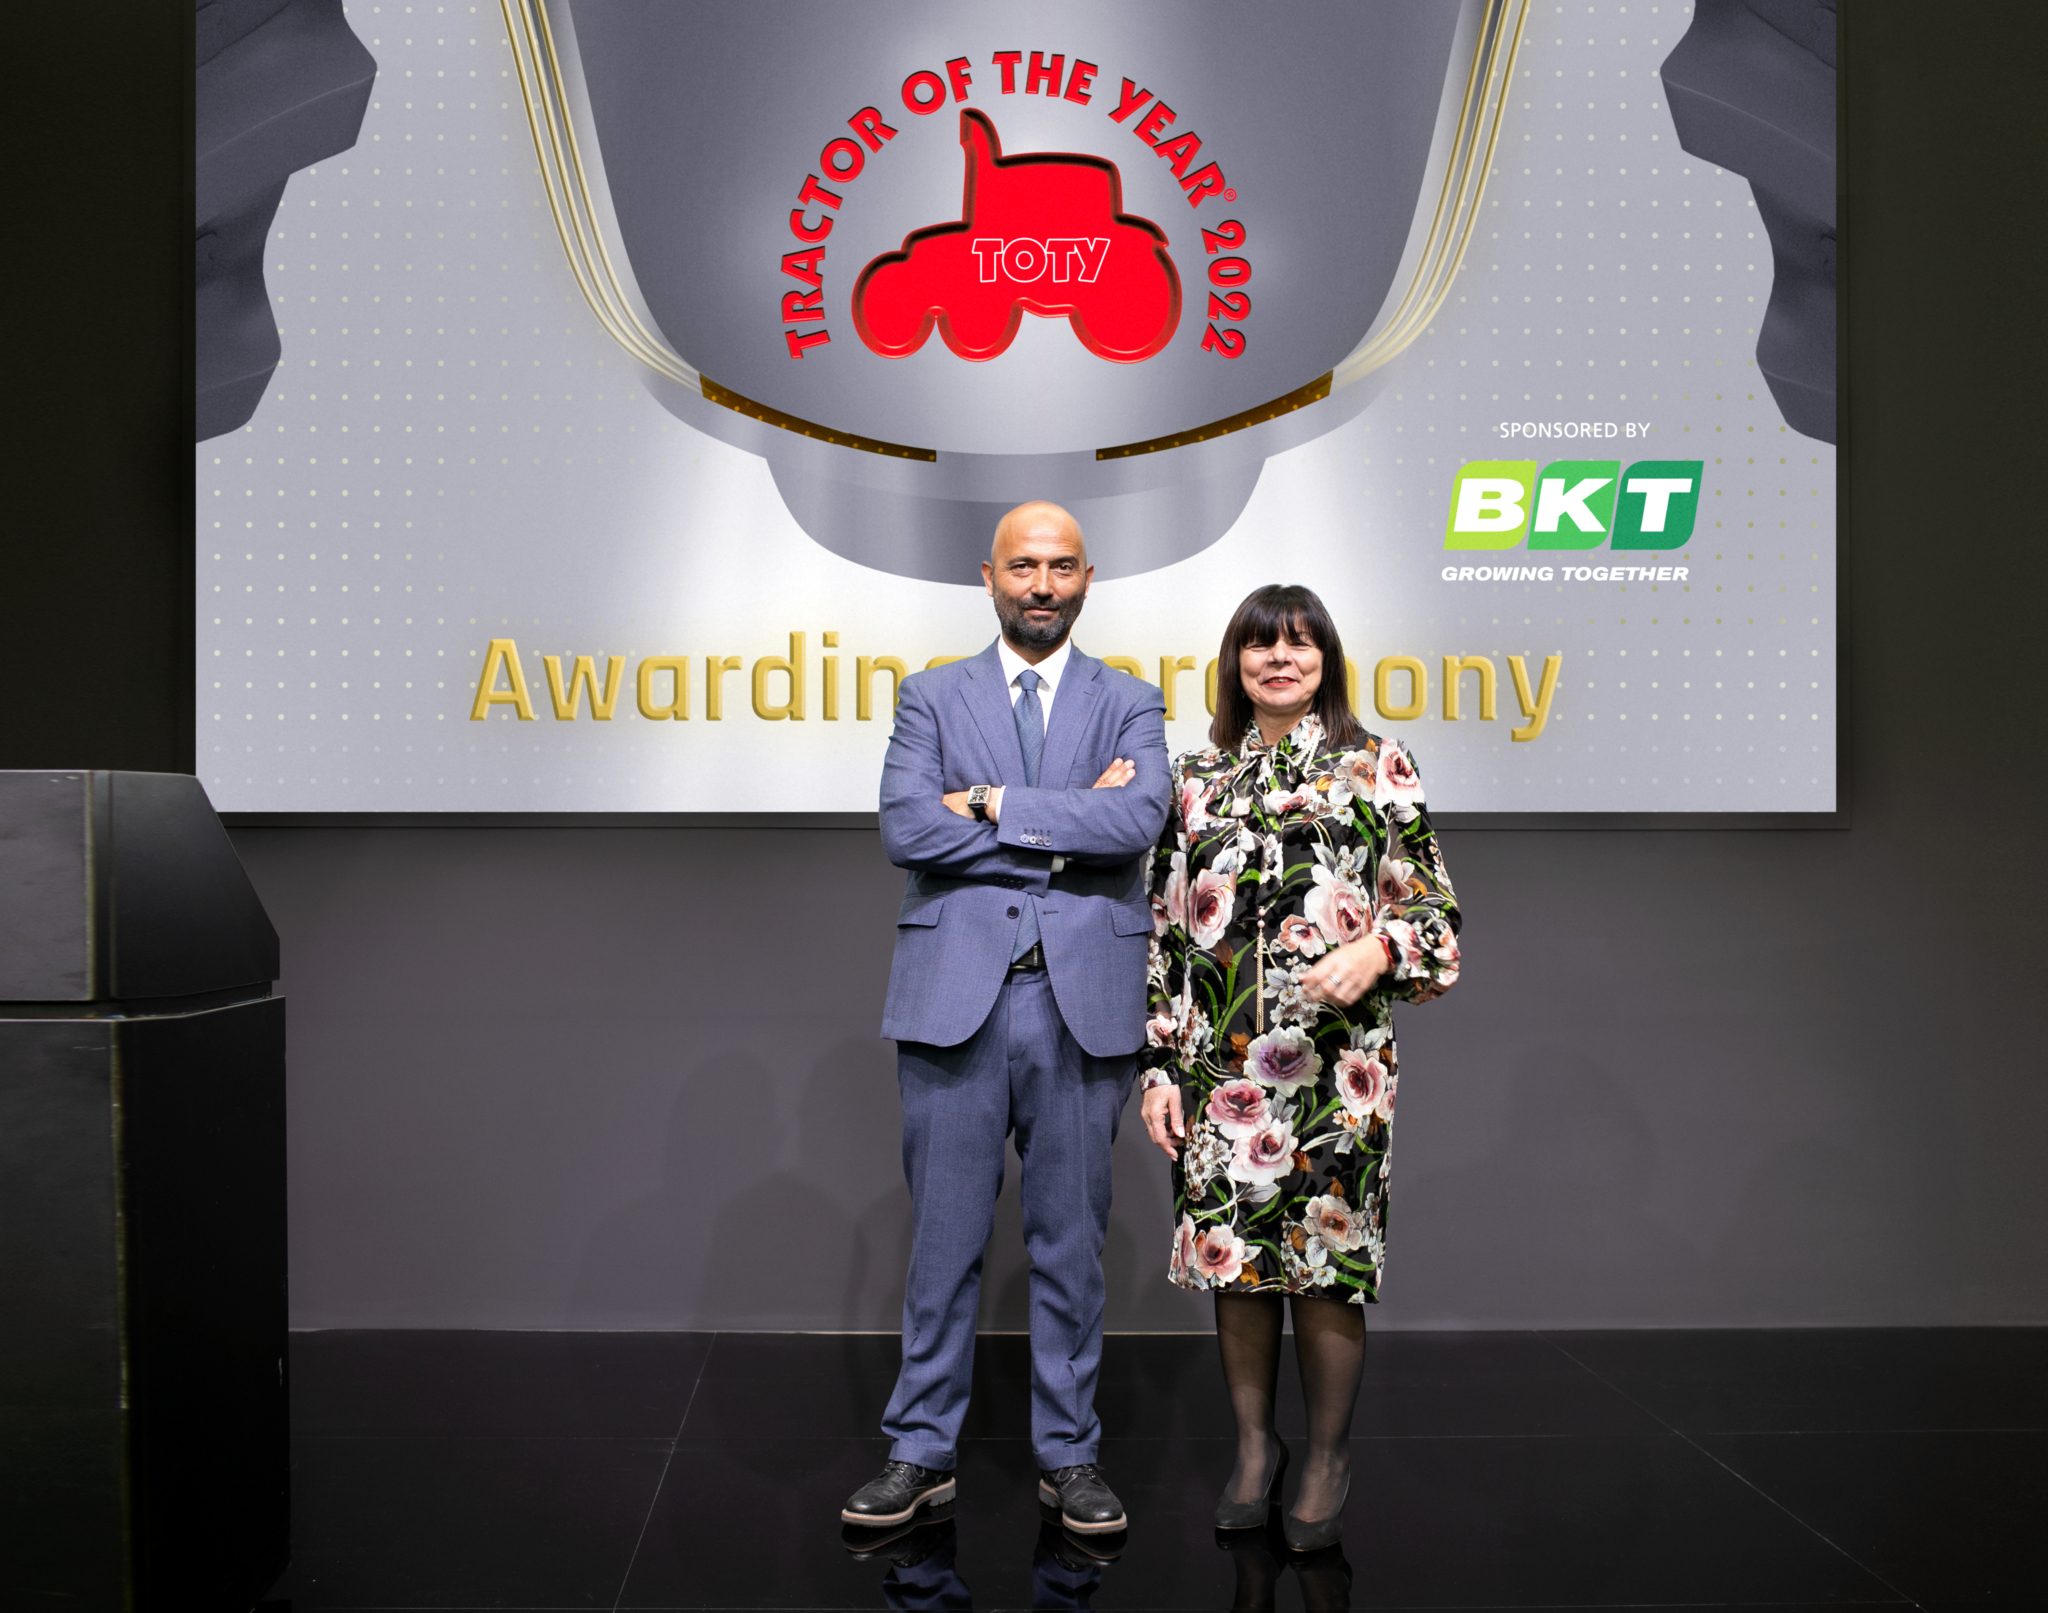 BKT-supported Tractor of the Year 2022 announces winners